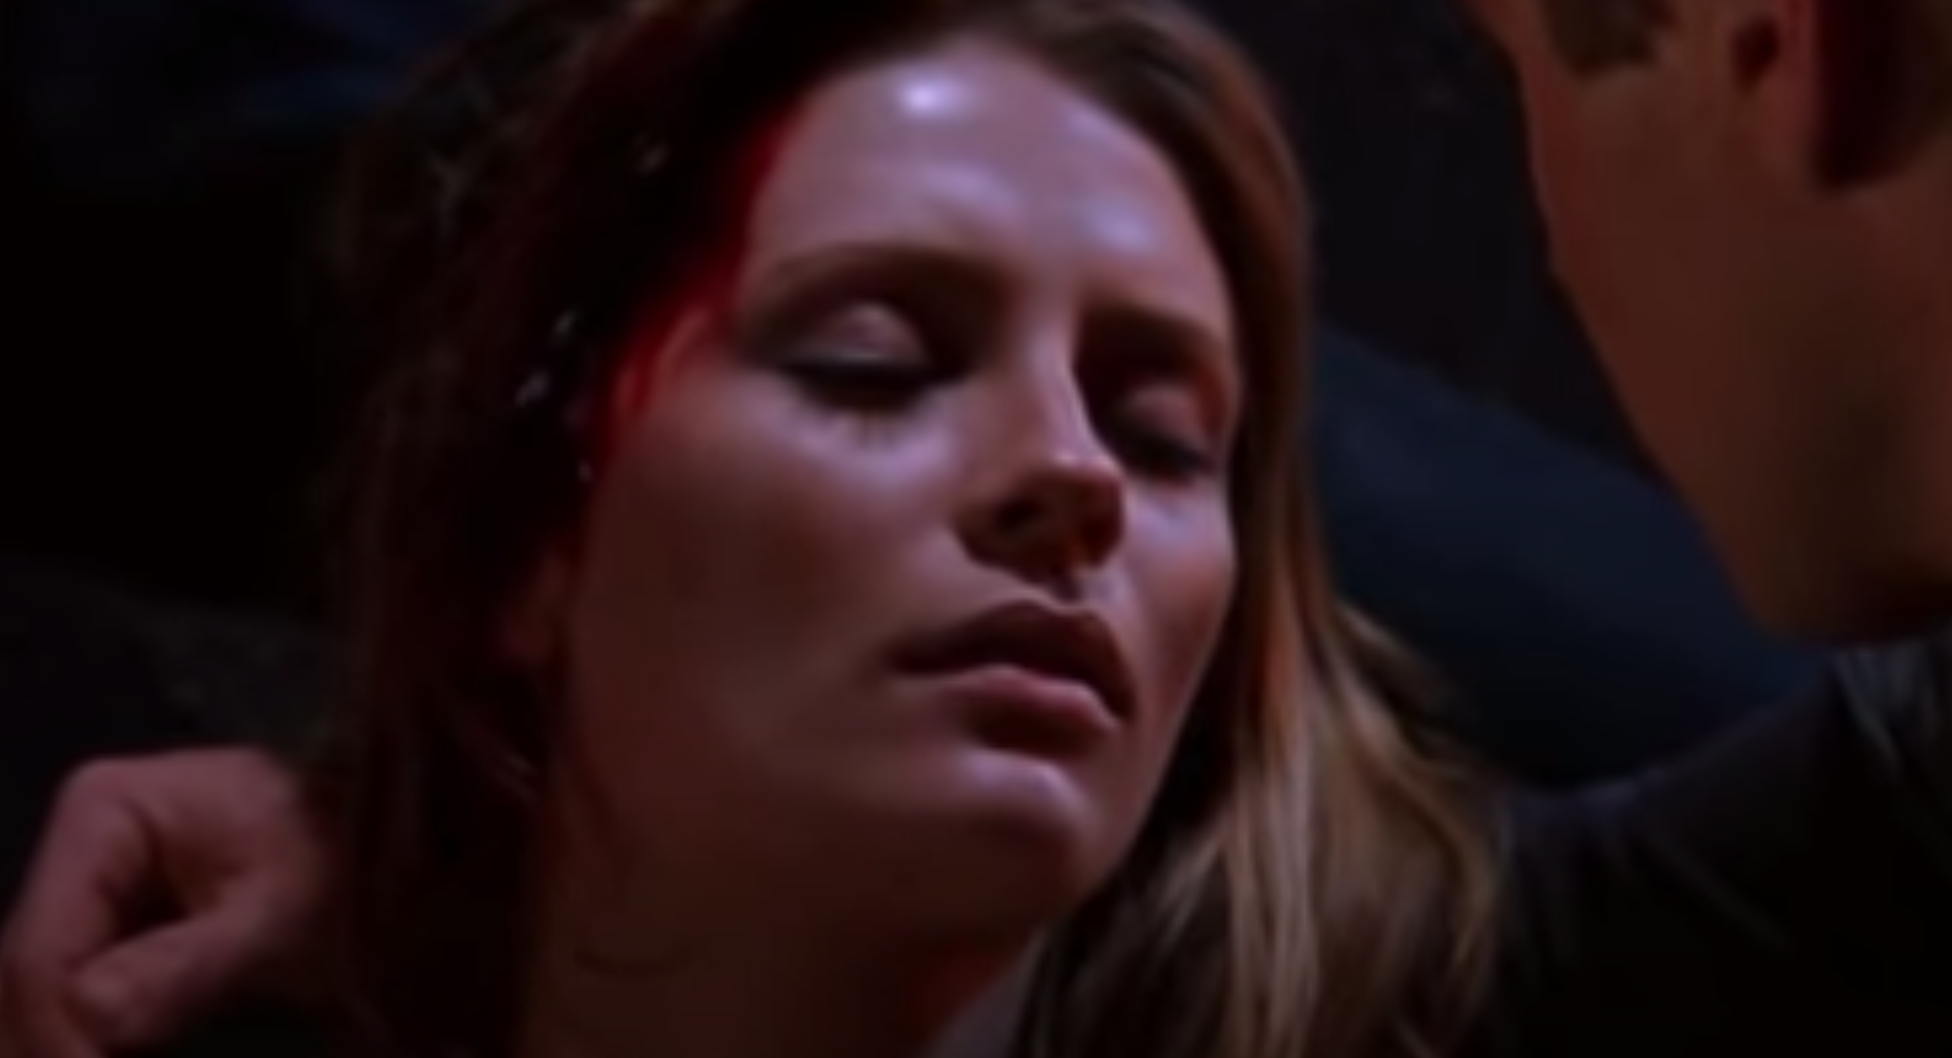 A woman with blood on her head lies on the ground with her eyes shut